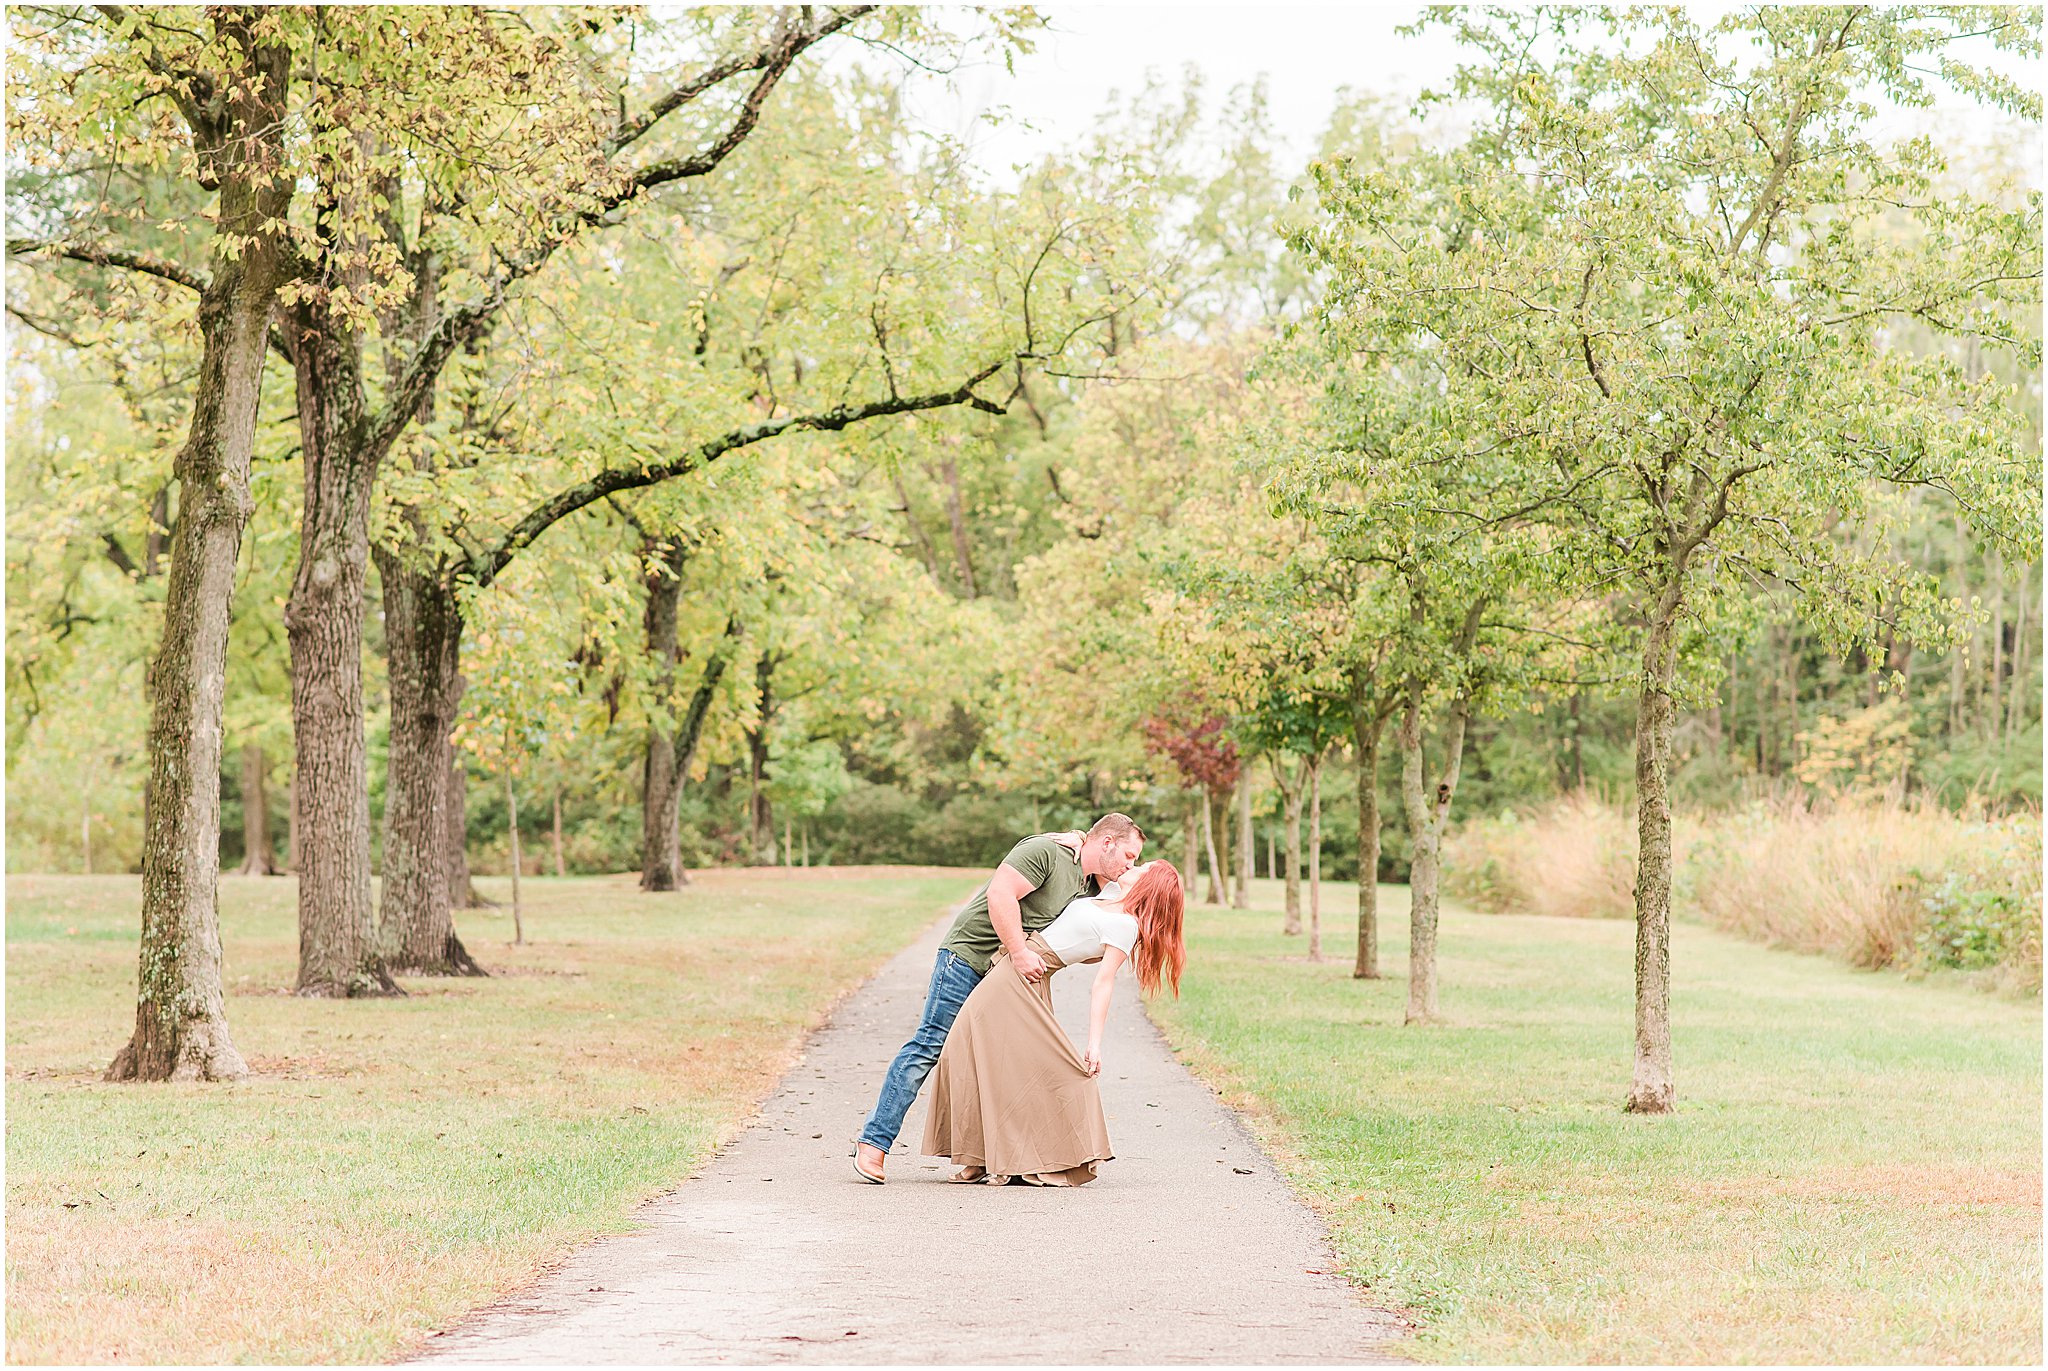 Dip kiss during Southeastway Park family session